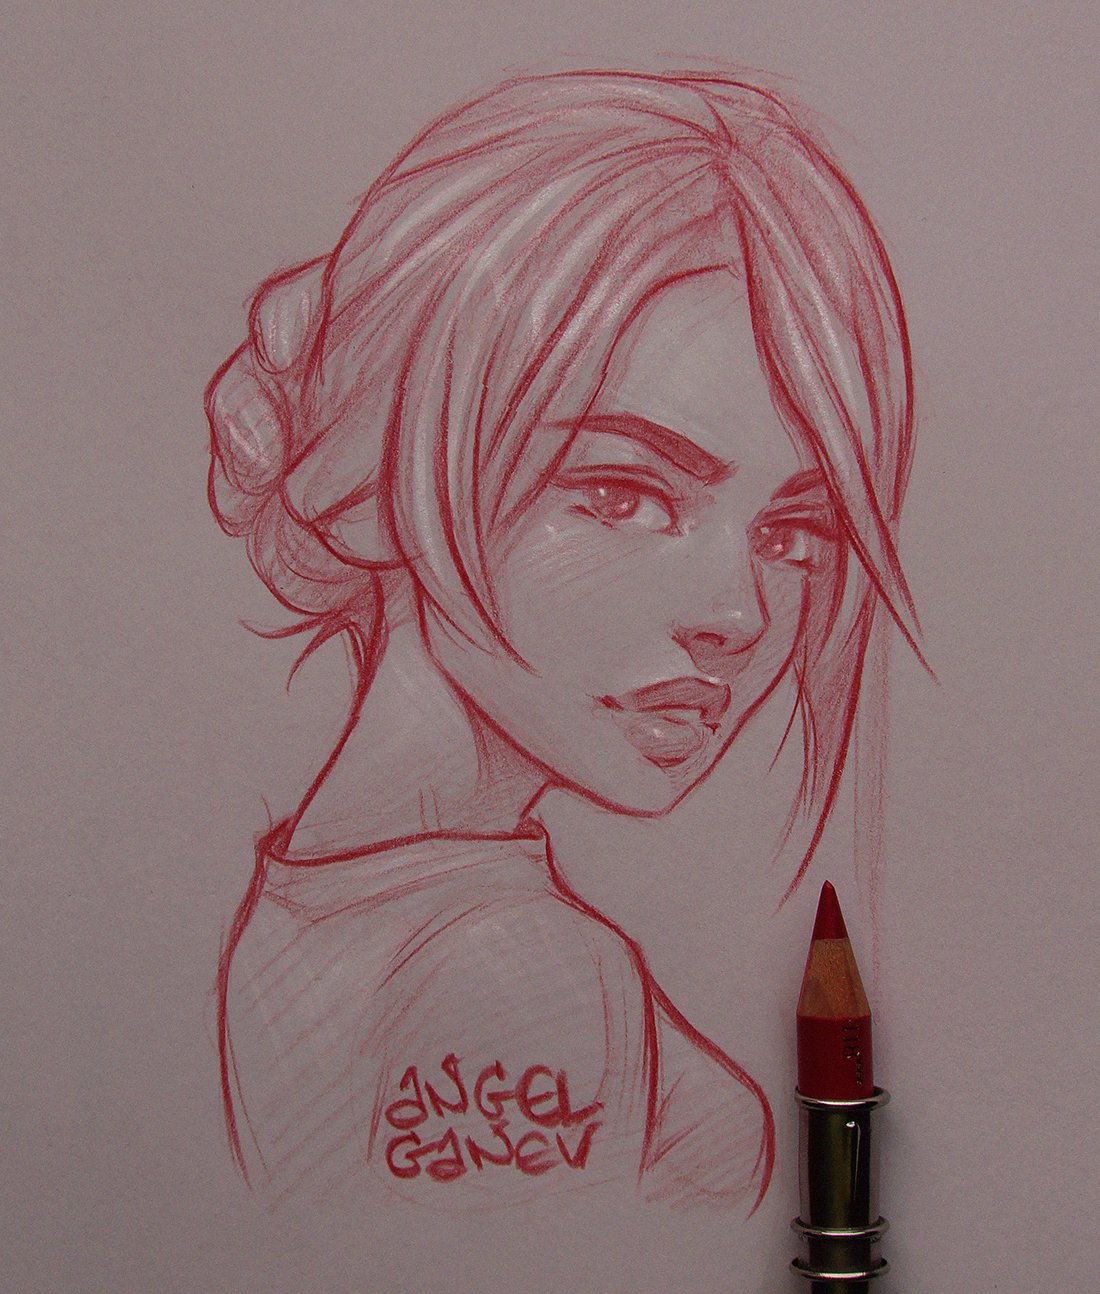 Red ink sketches march 16  may 16 on Behance